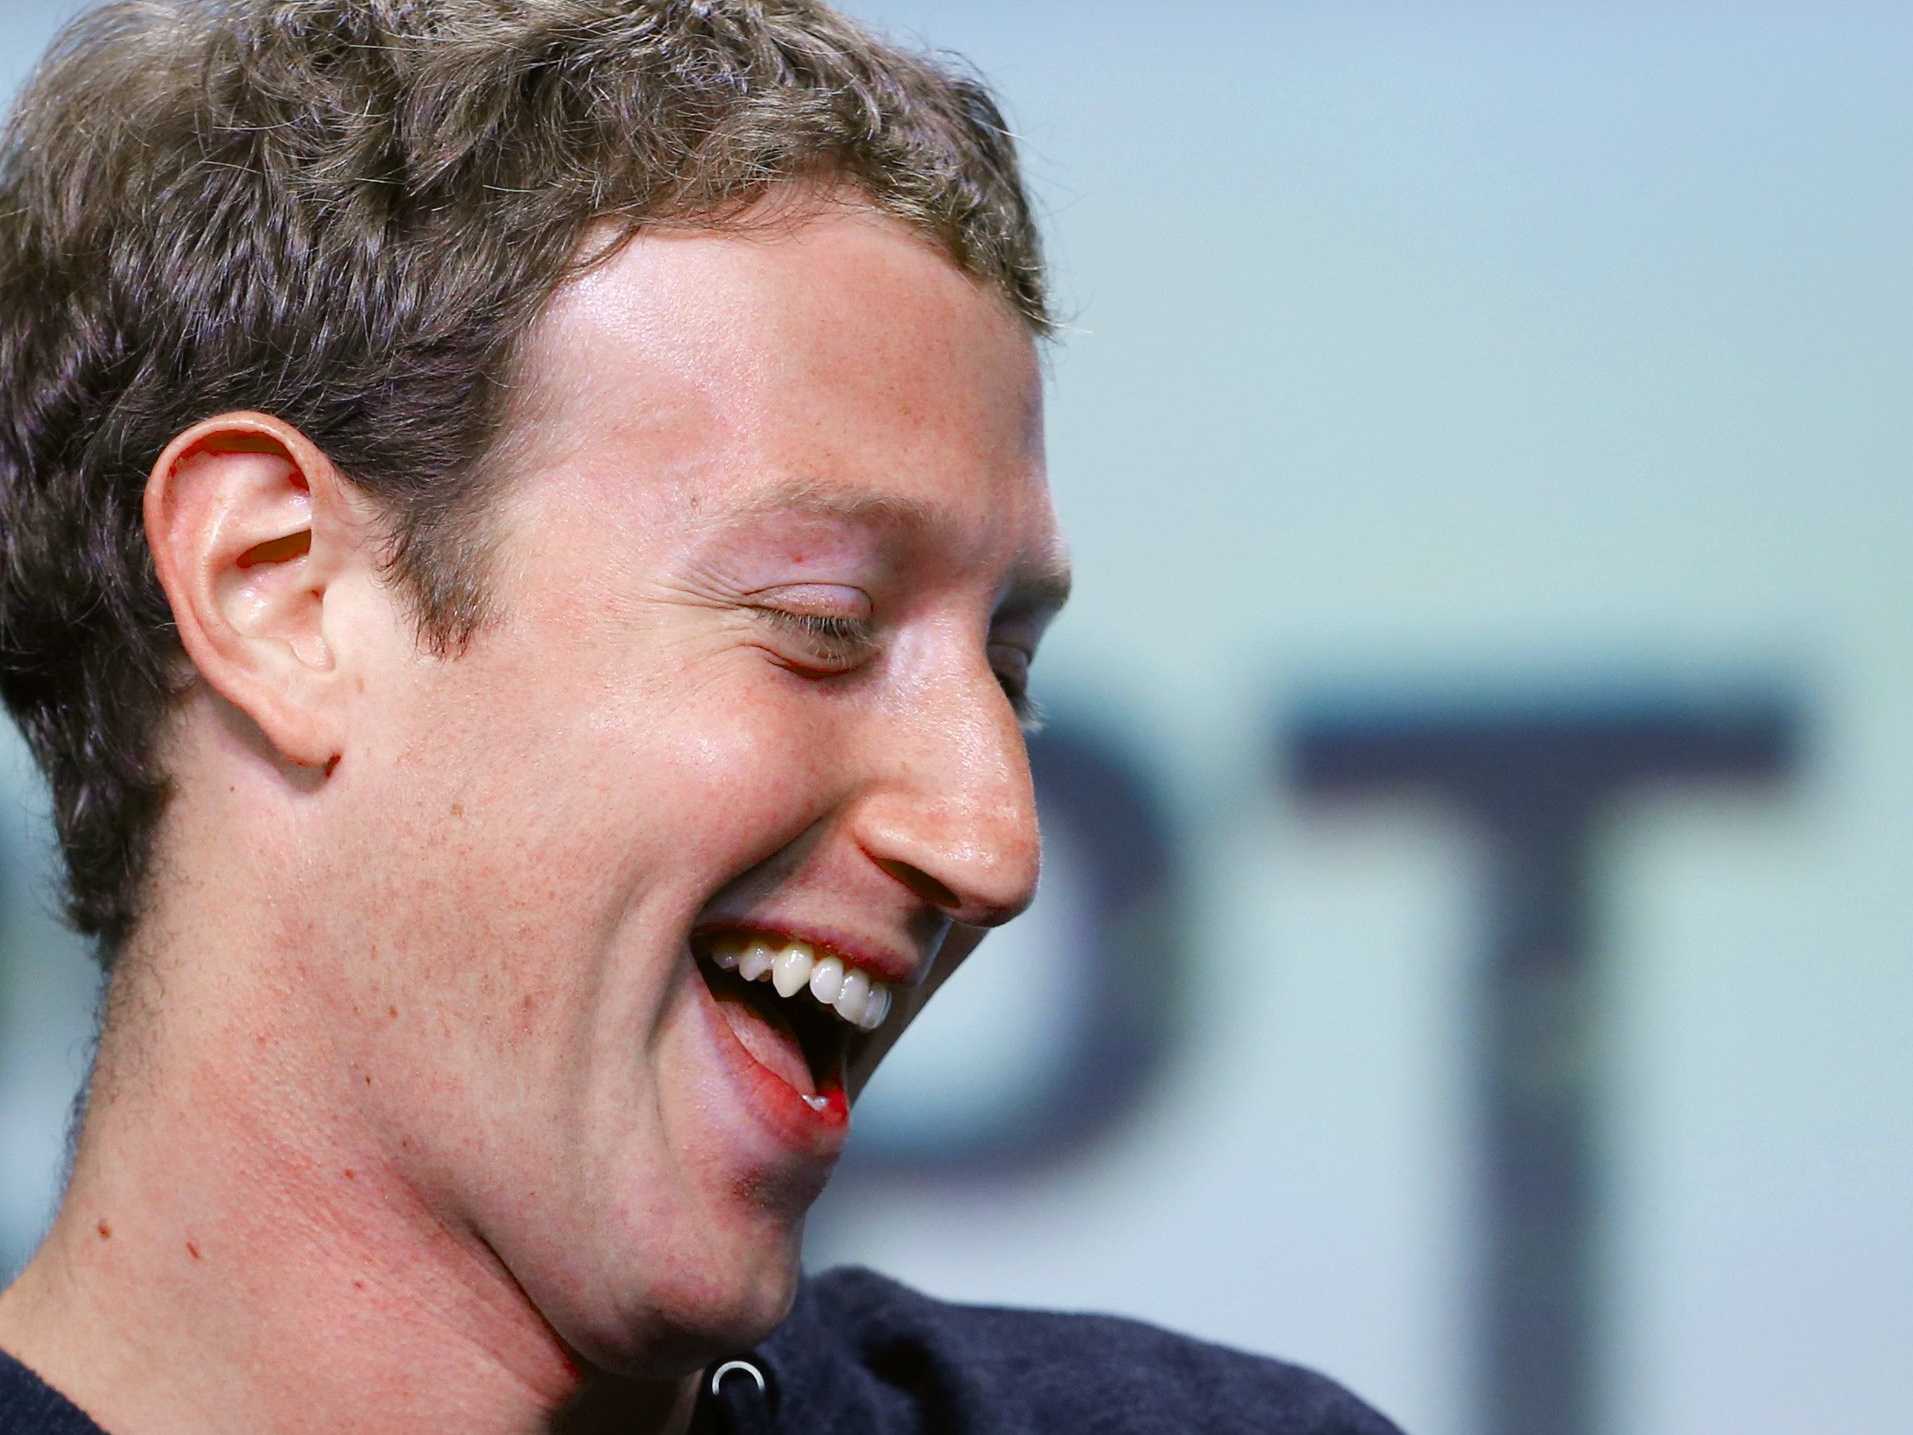 zuckerberg-why-i-stayed-facebook-ceo-even-though-many-thought-i-should-quit (1)